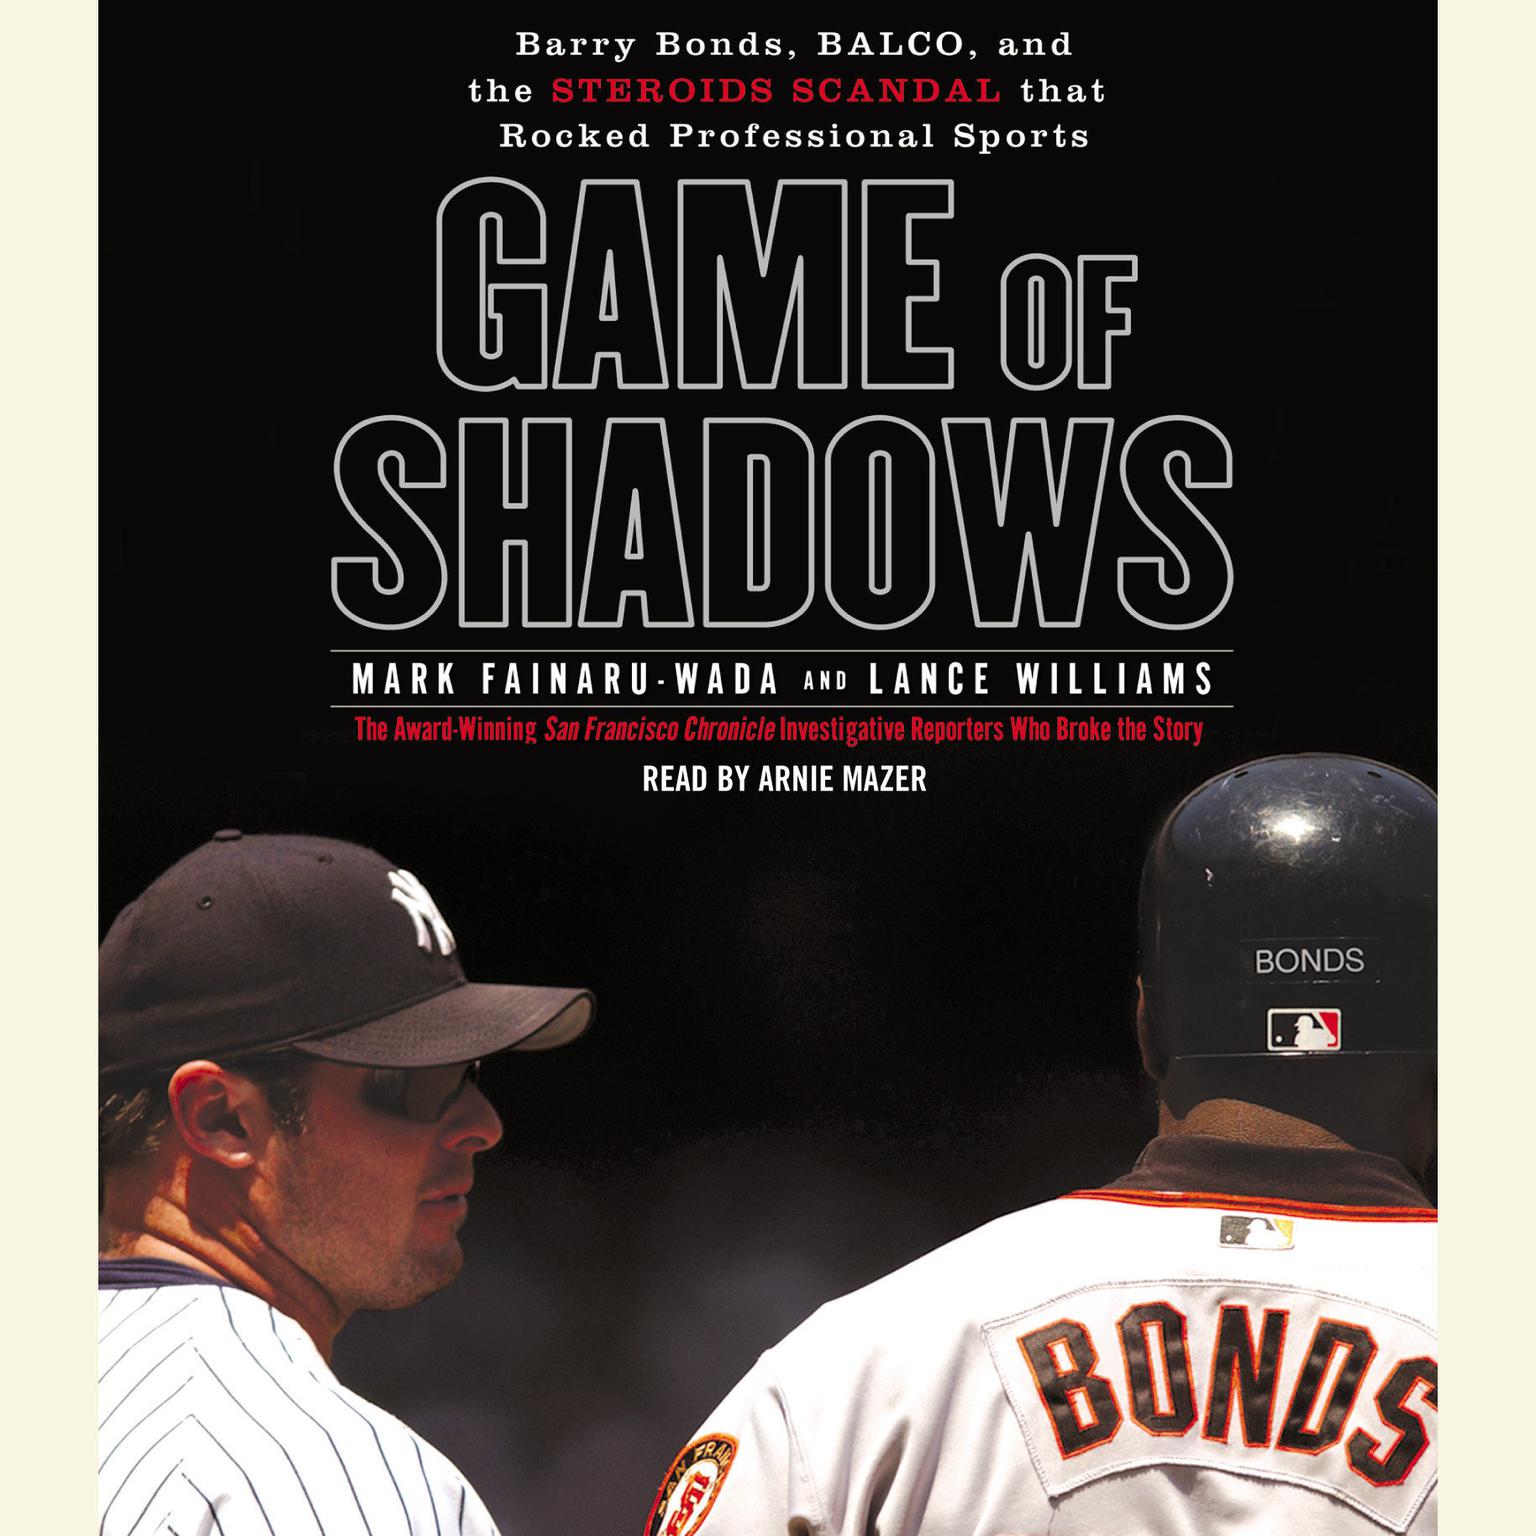 Game of Shadows (Abridged): Barry Bonds, BALCO, and the Steroids Scandal that Rocked Professional Sports Audiobook, by Mark Fainaru-Wada